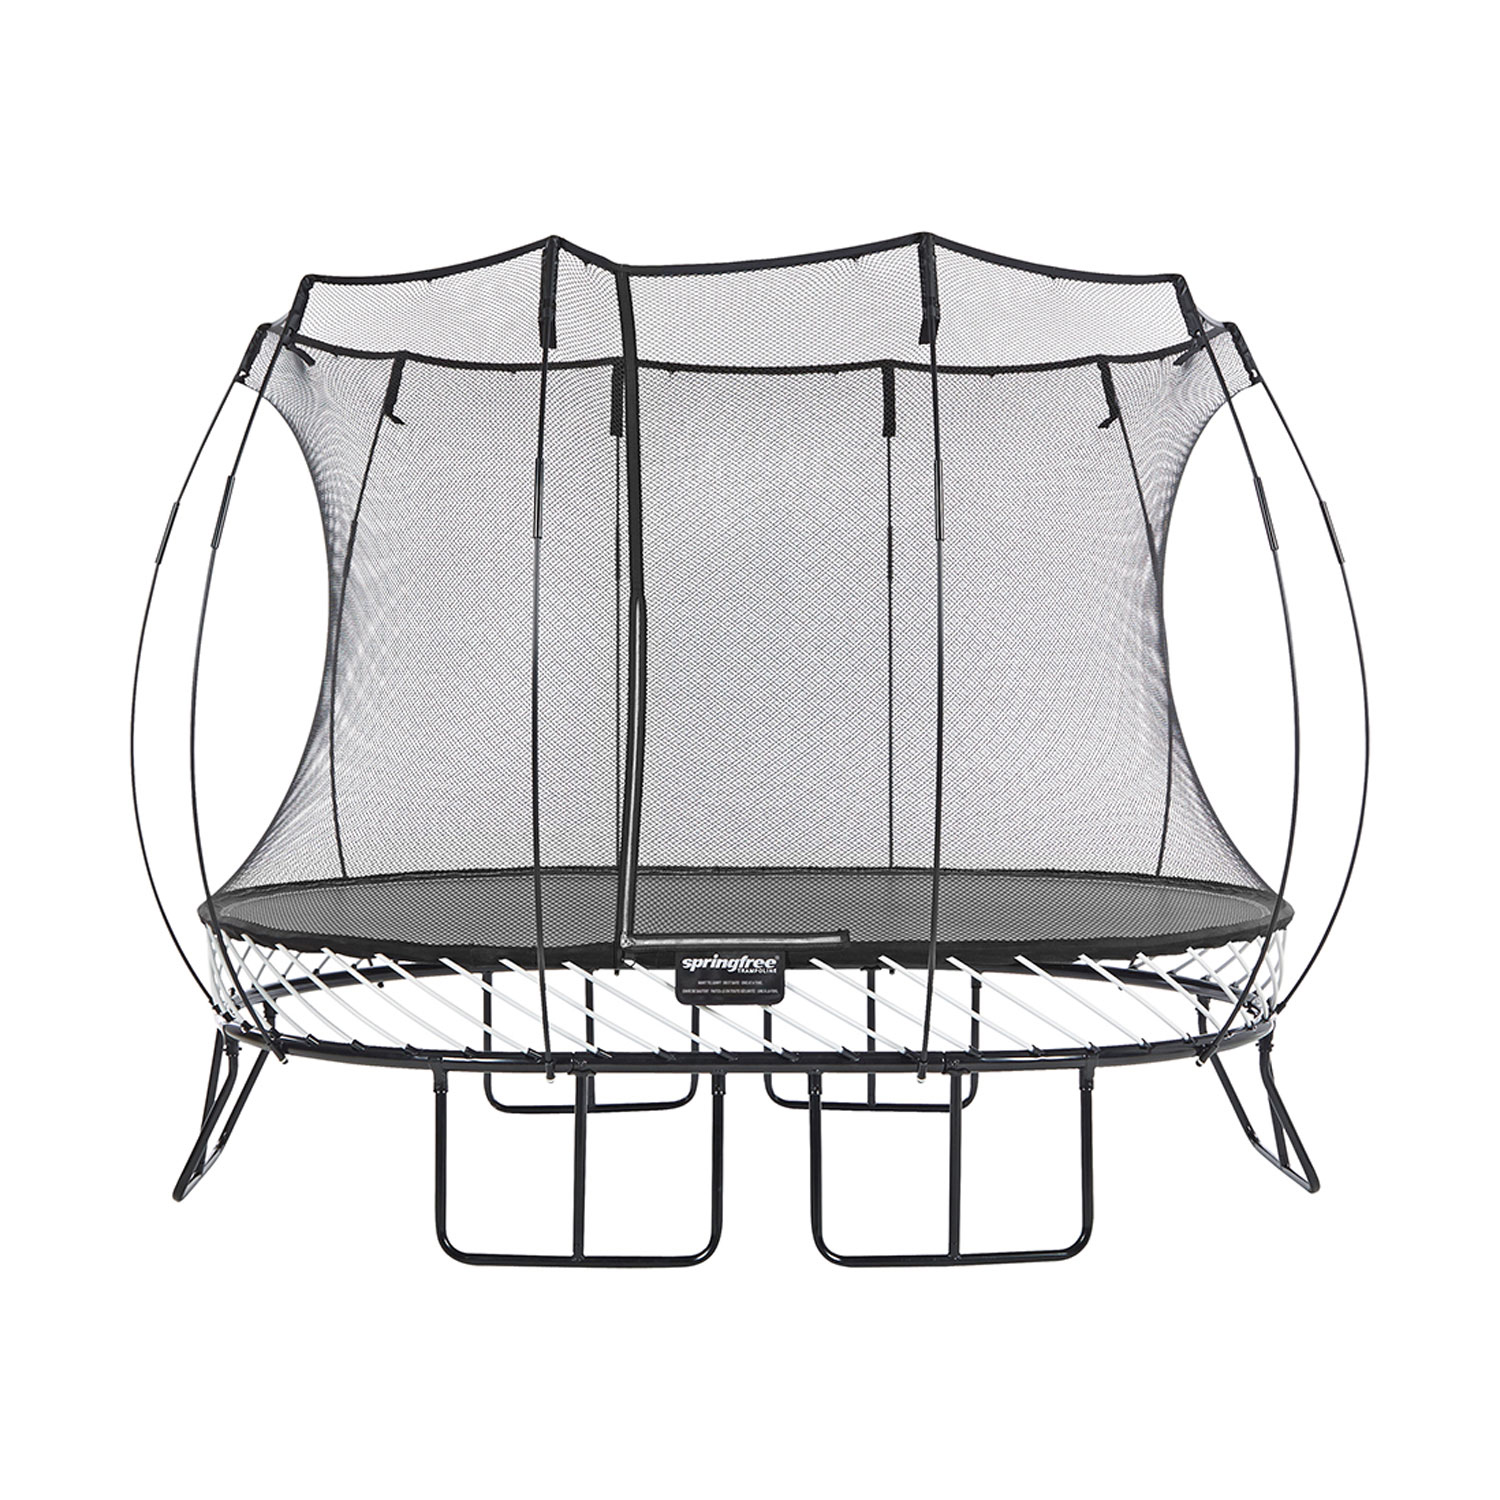 Springfree Outdoor 8 x 11 Ft Trampoline, Enclosure, Hoop Game, and Step Ladder - image 2 of 12